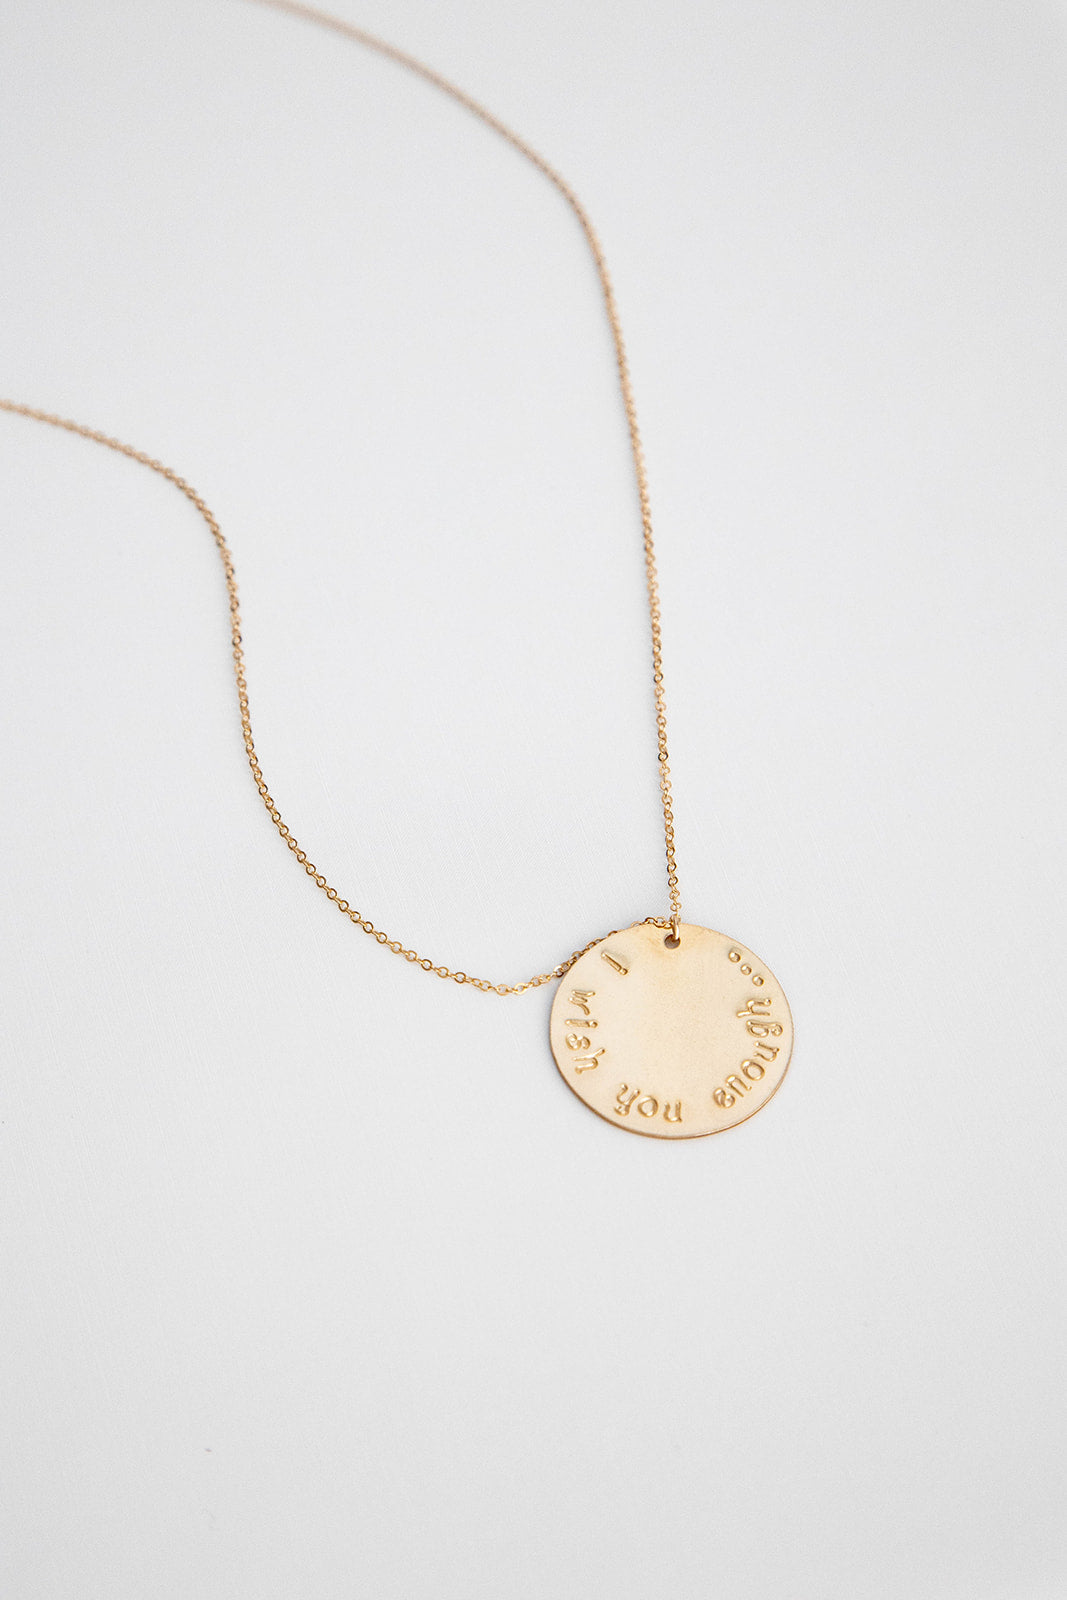 A 25.4 mm 14k gold filled disc hung on a 14k gold cable link chain necklace lays on a white background.